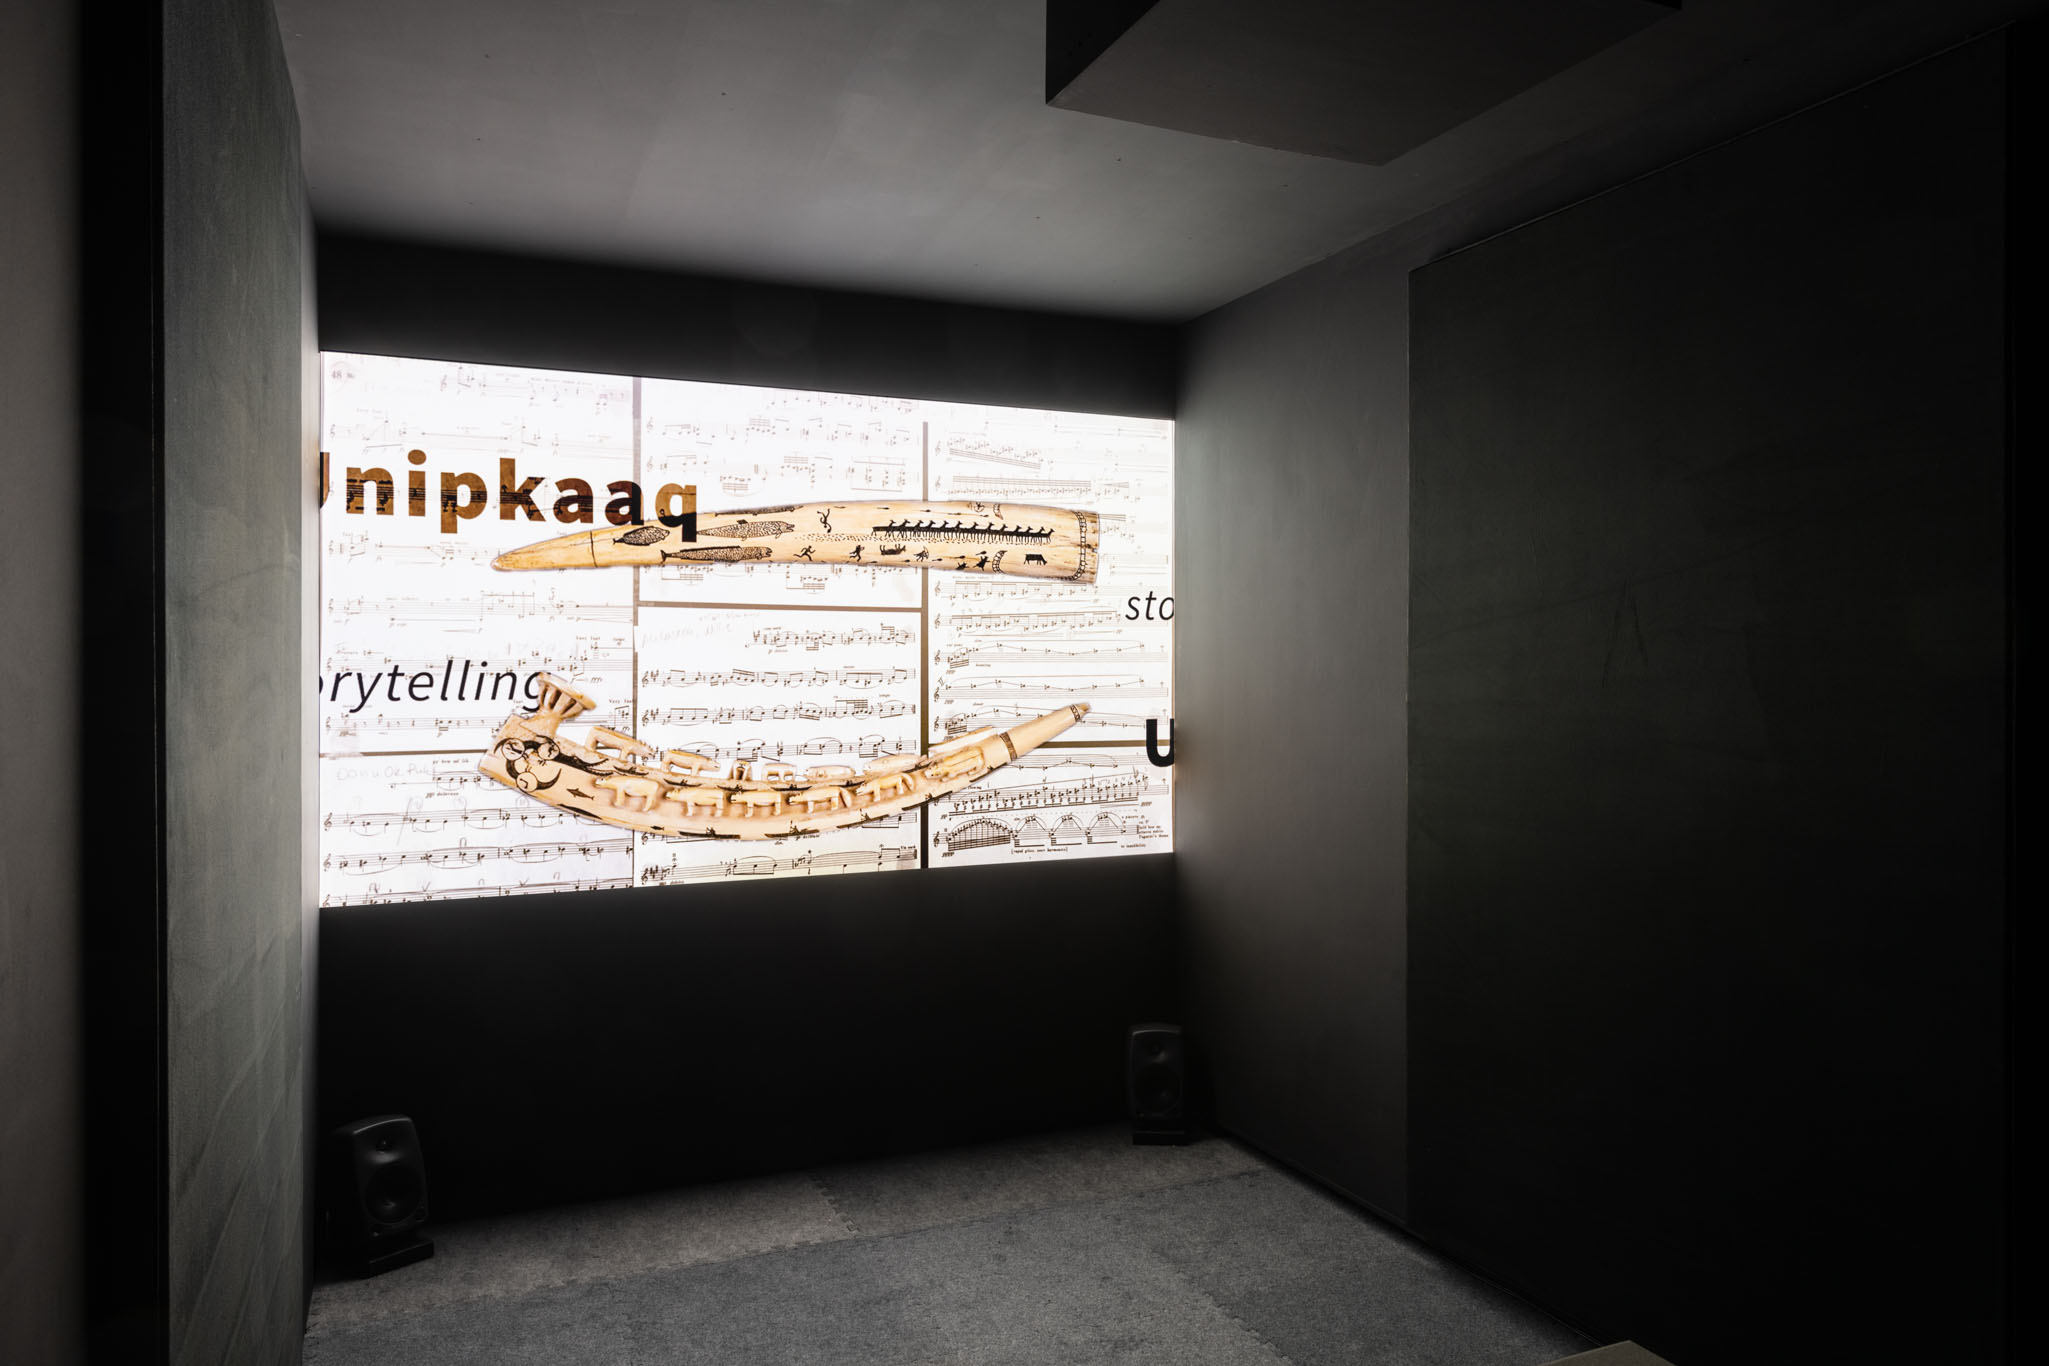 Heidi Aklaseaq Senungetuk, Qutaaŋuaqtuit: Dripping Music, 2018. Soundings: An Exhibition in Five Parts, installation view at Walter Phillips Gallery, Banff Centre for Creativity, 2021.